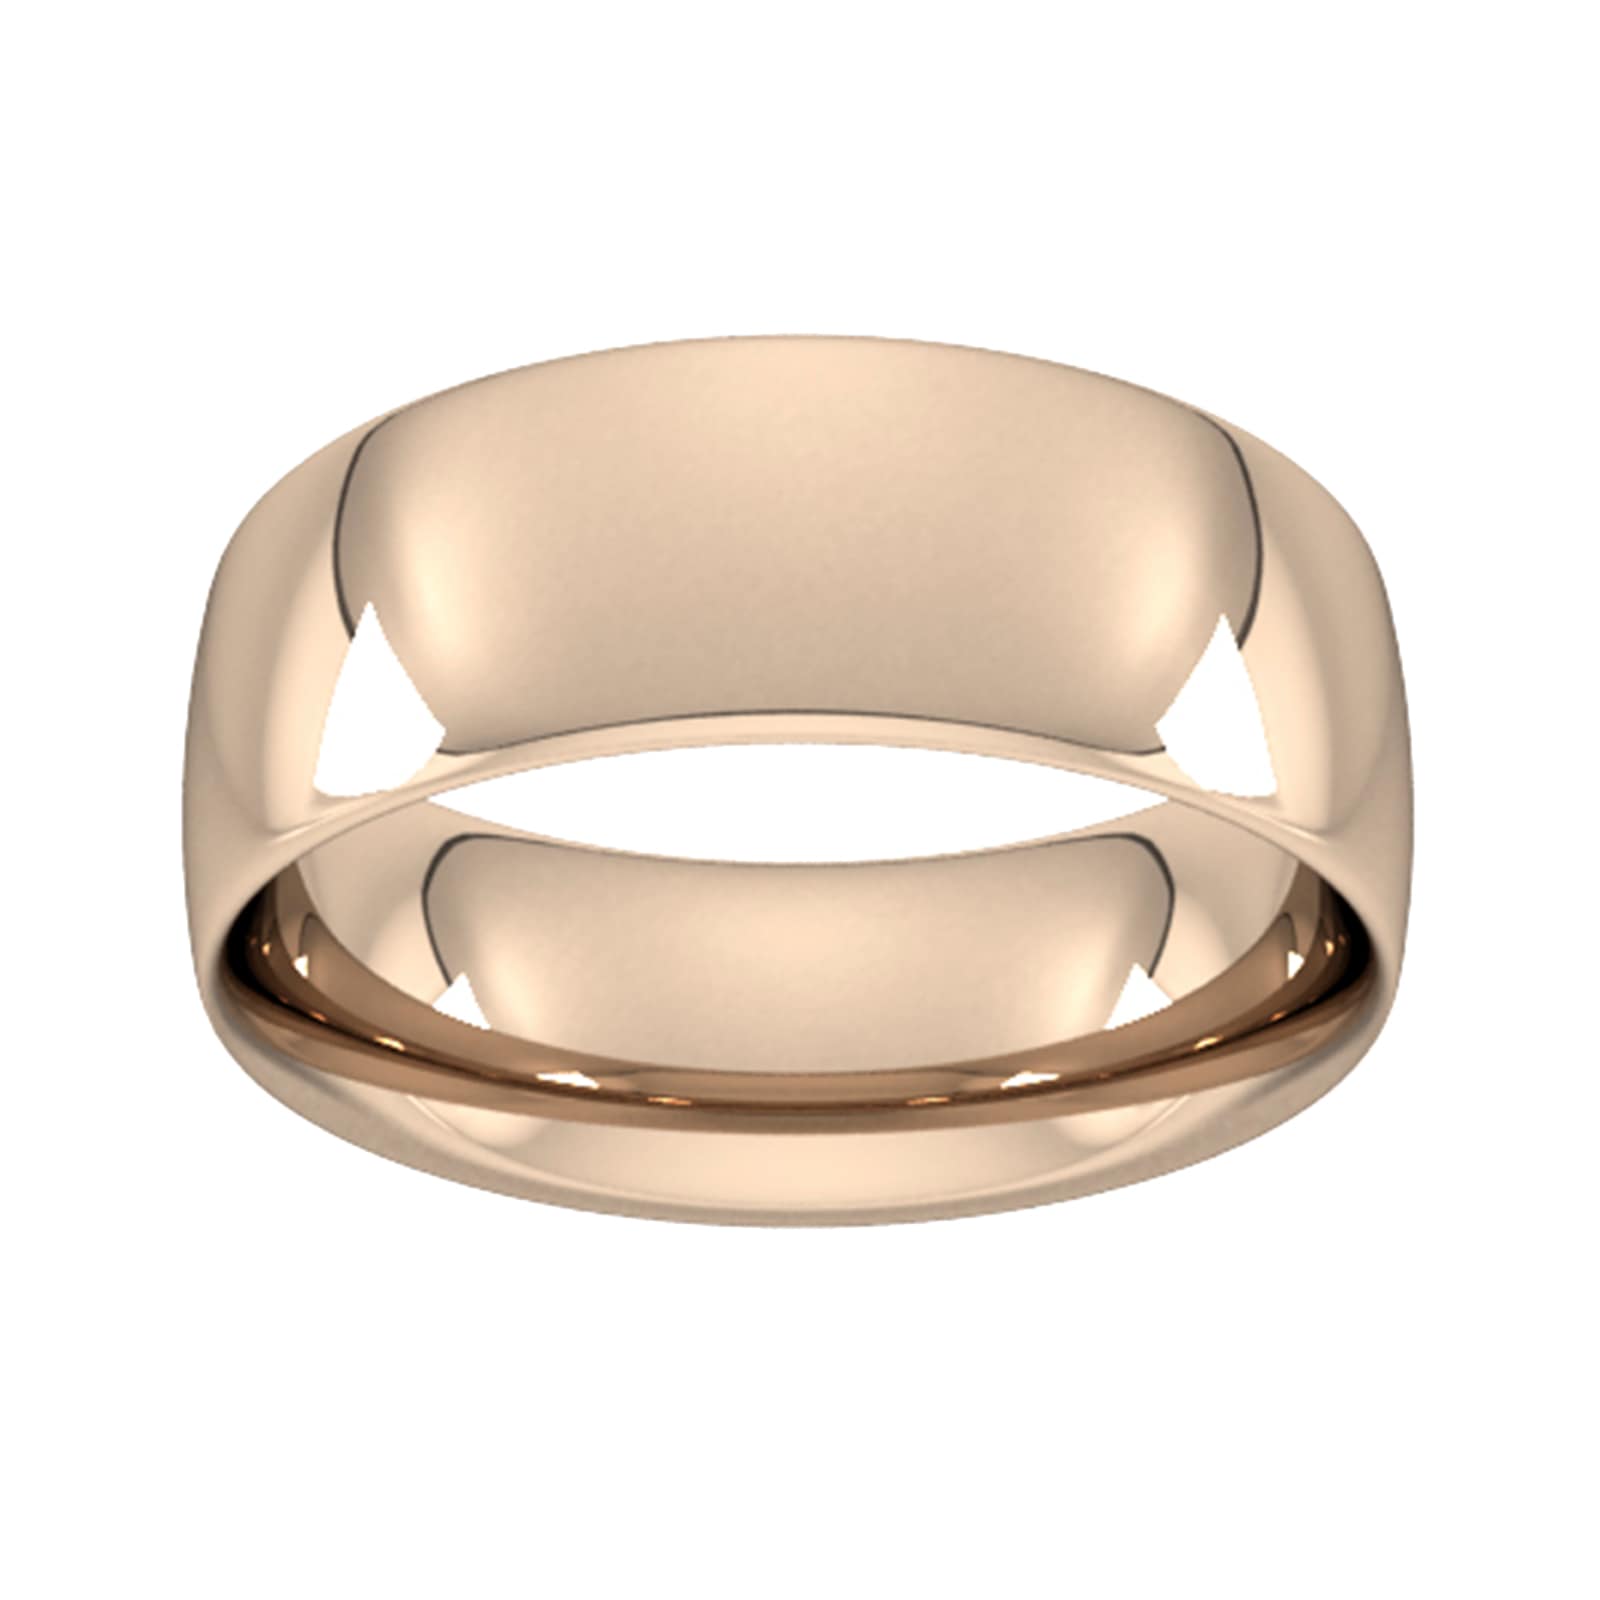 8mm Traditional Court Heavy Wedding Ring In 9 Carat Rose Gold - Ring Size J